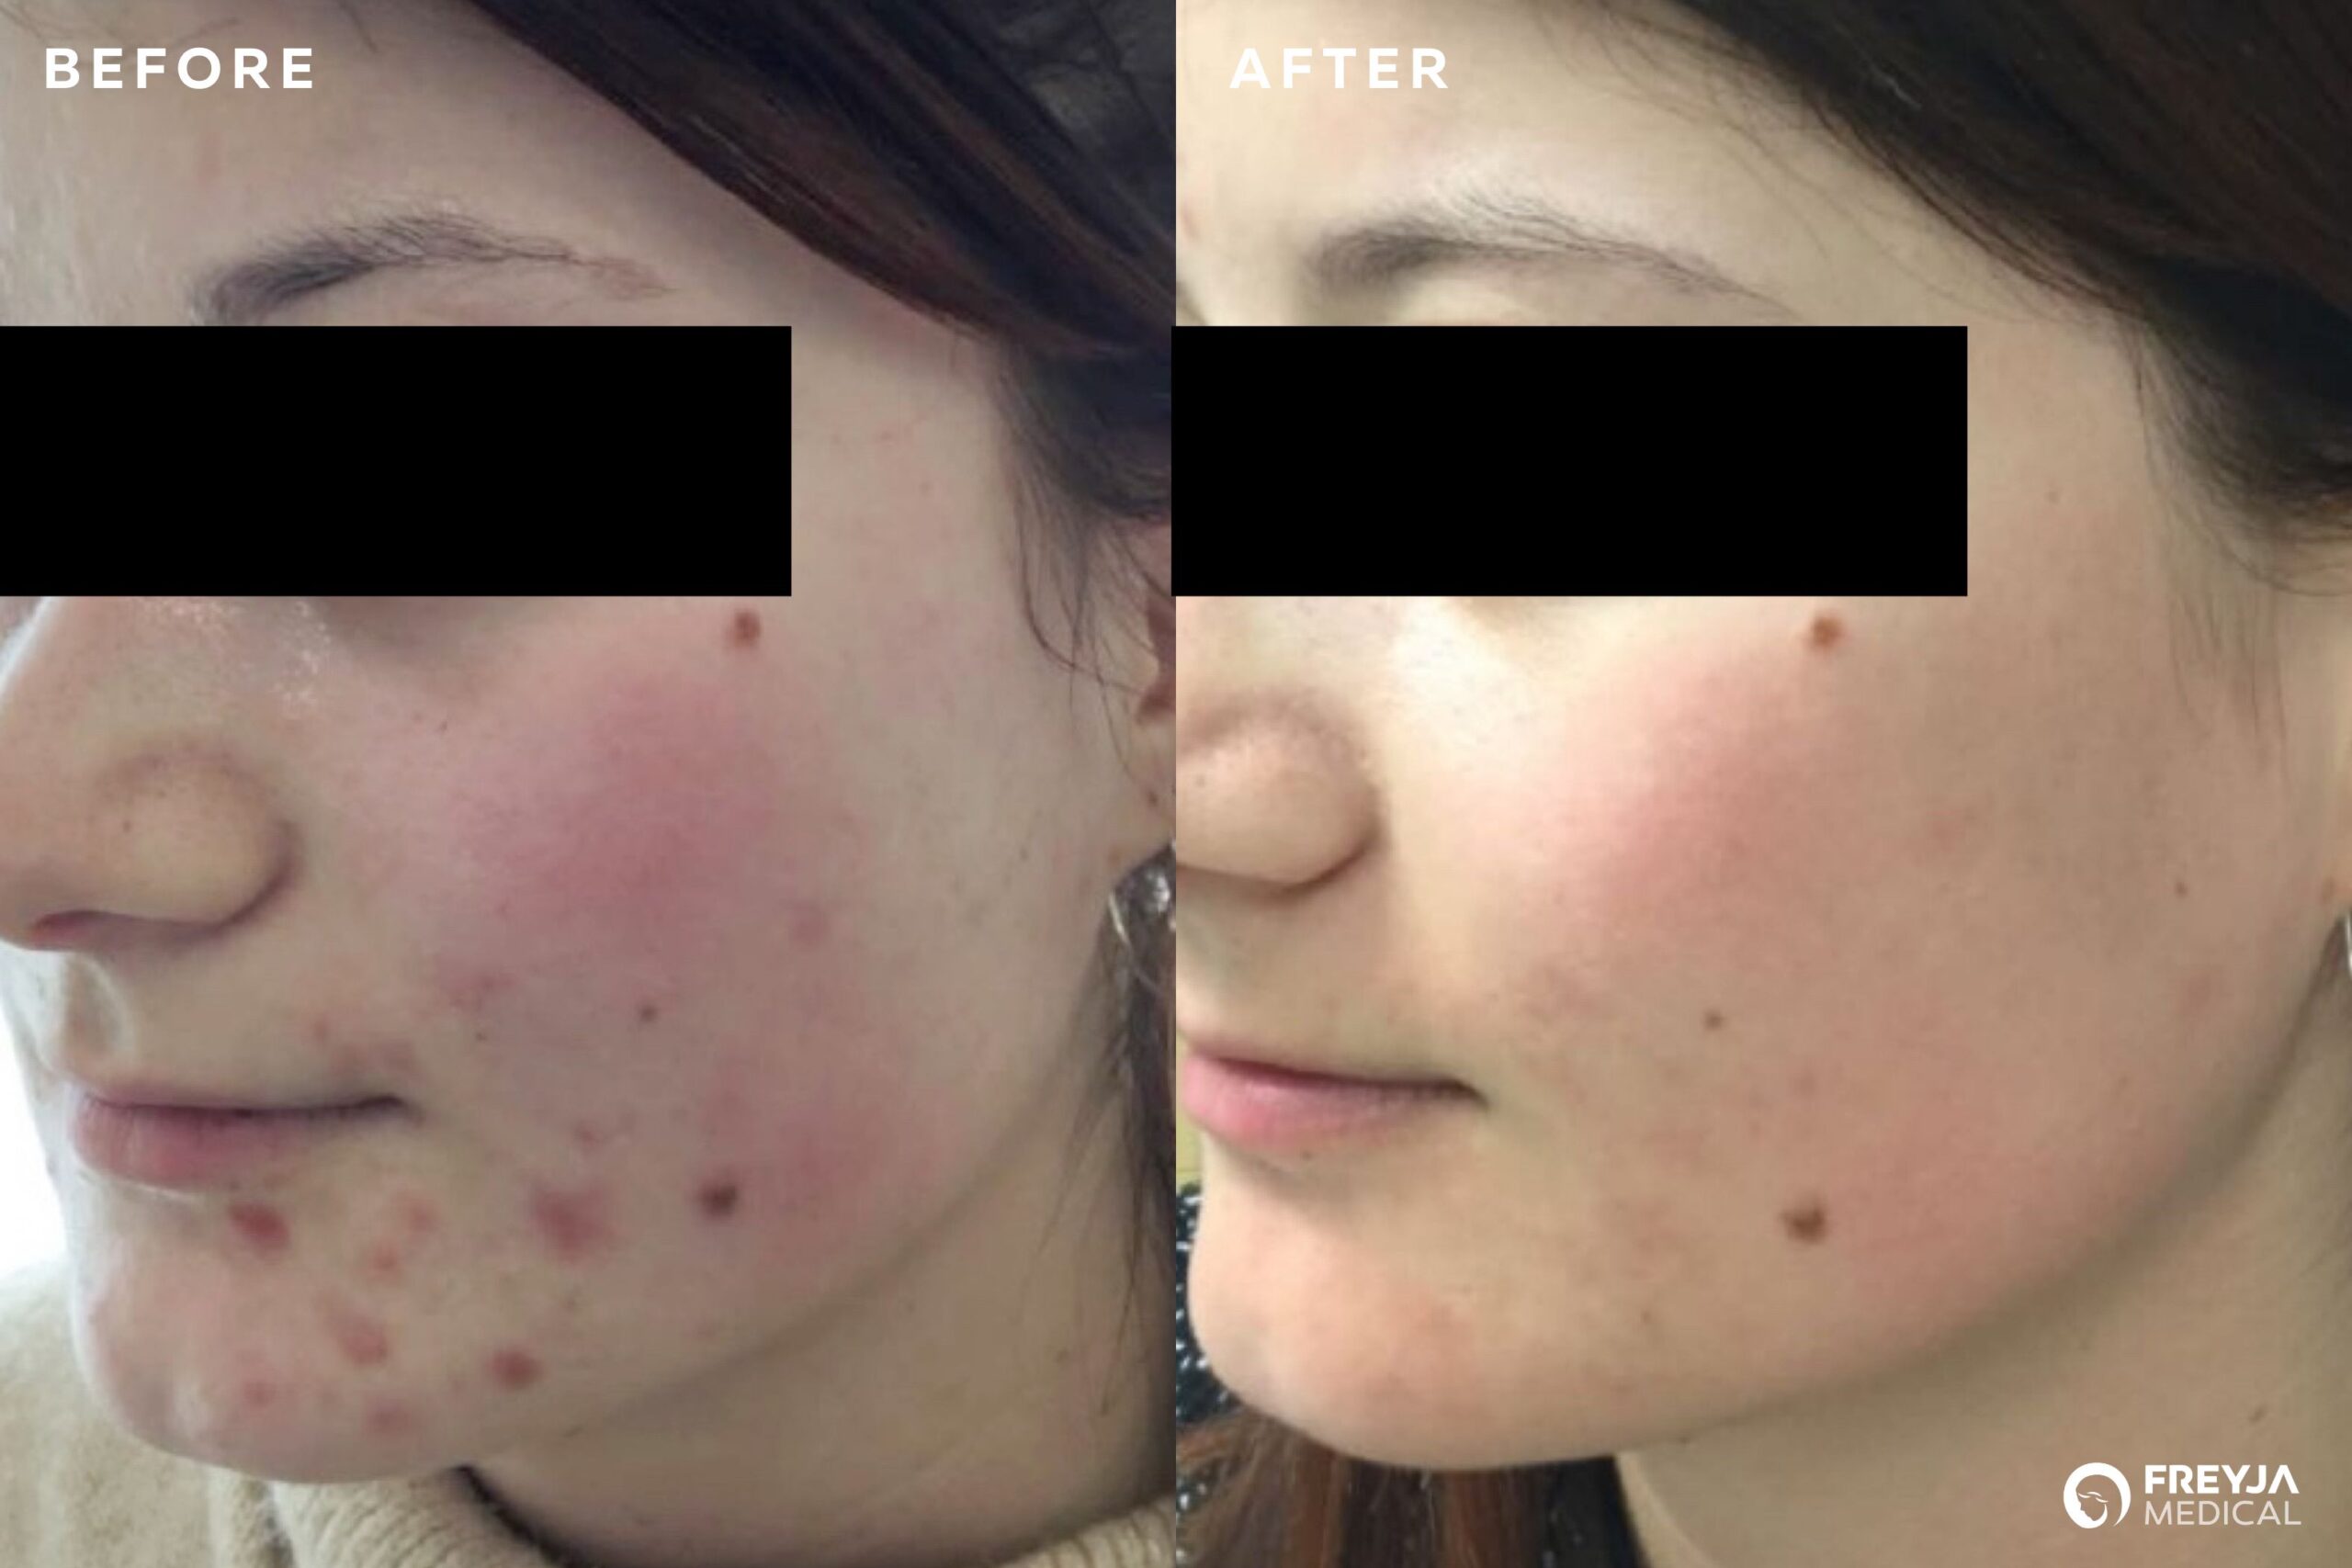 Chemical Peel treatments at Freyja Medical. Results. Before and After Images